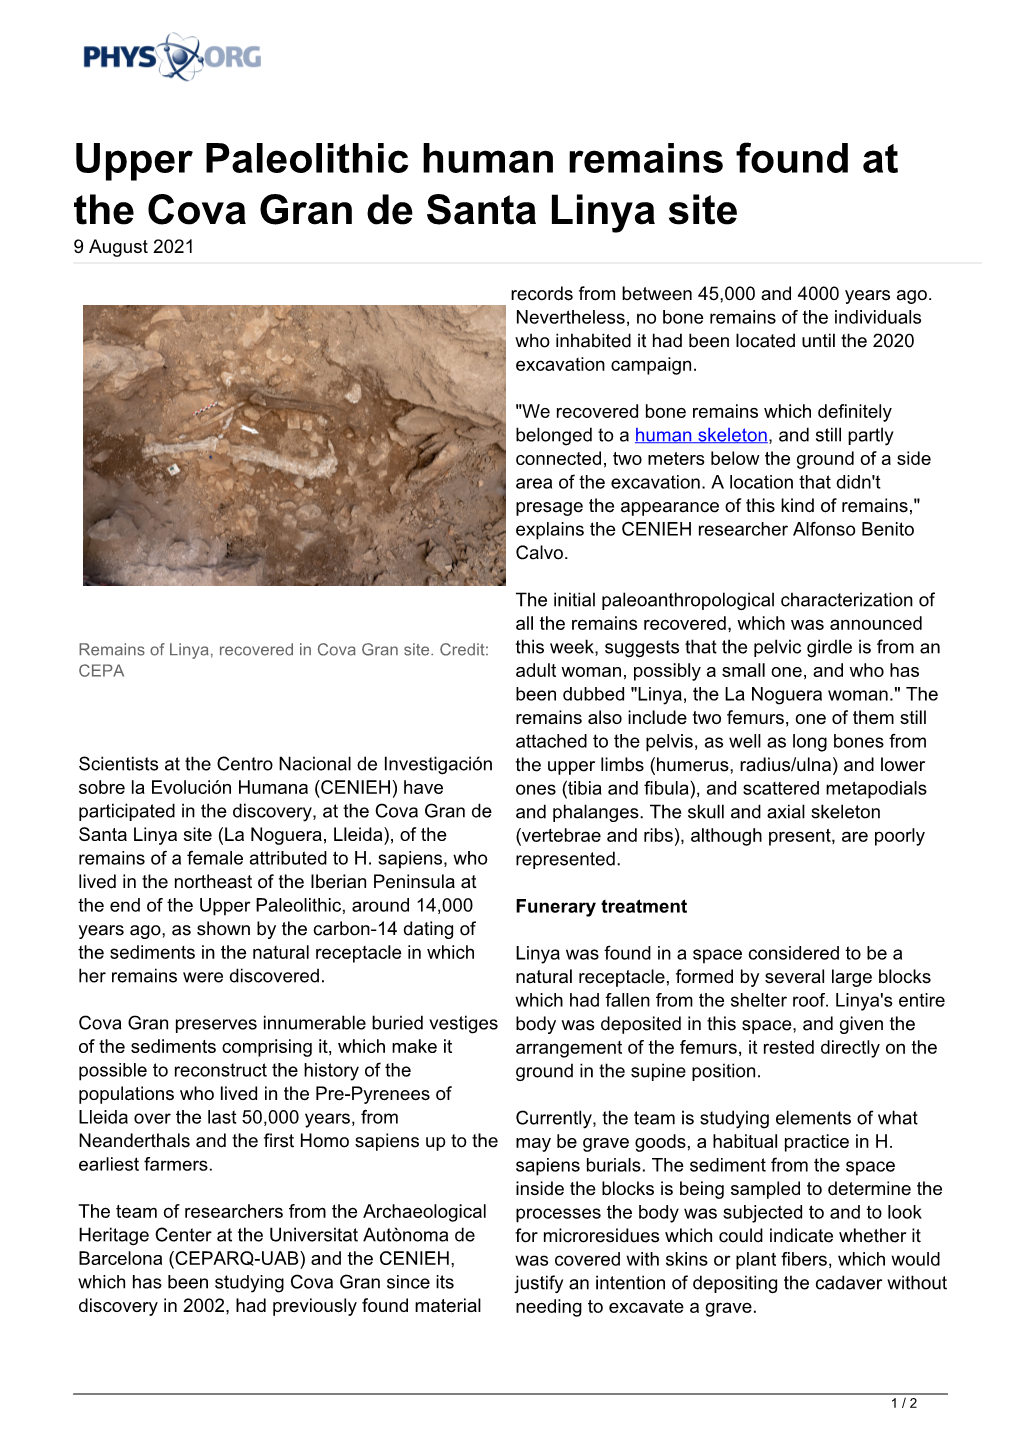 Upper Paleolithic Human Remains Found at the Cova Gran De Santa Linya Site 9 August 2021